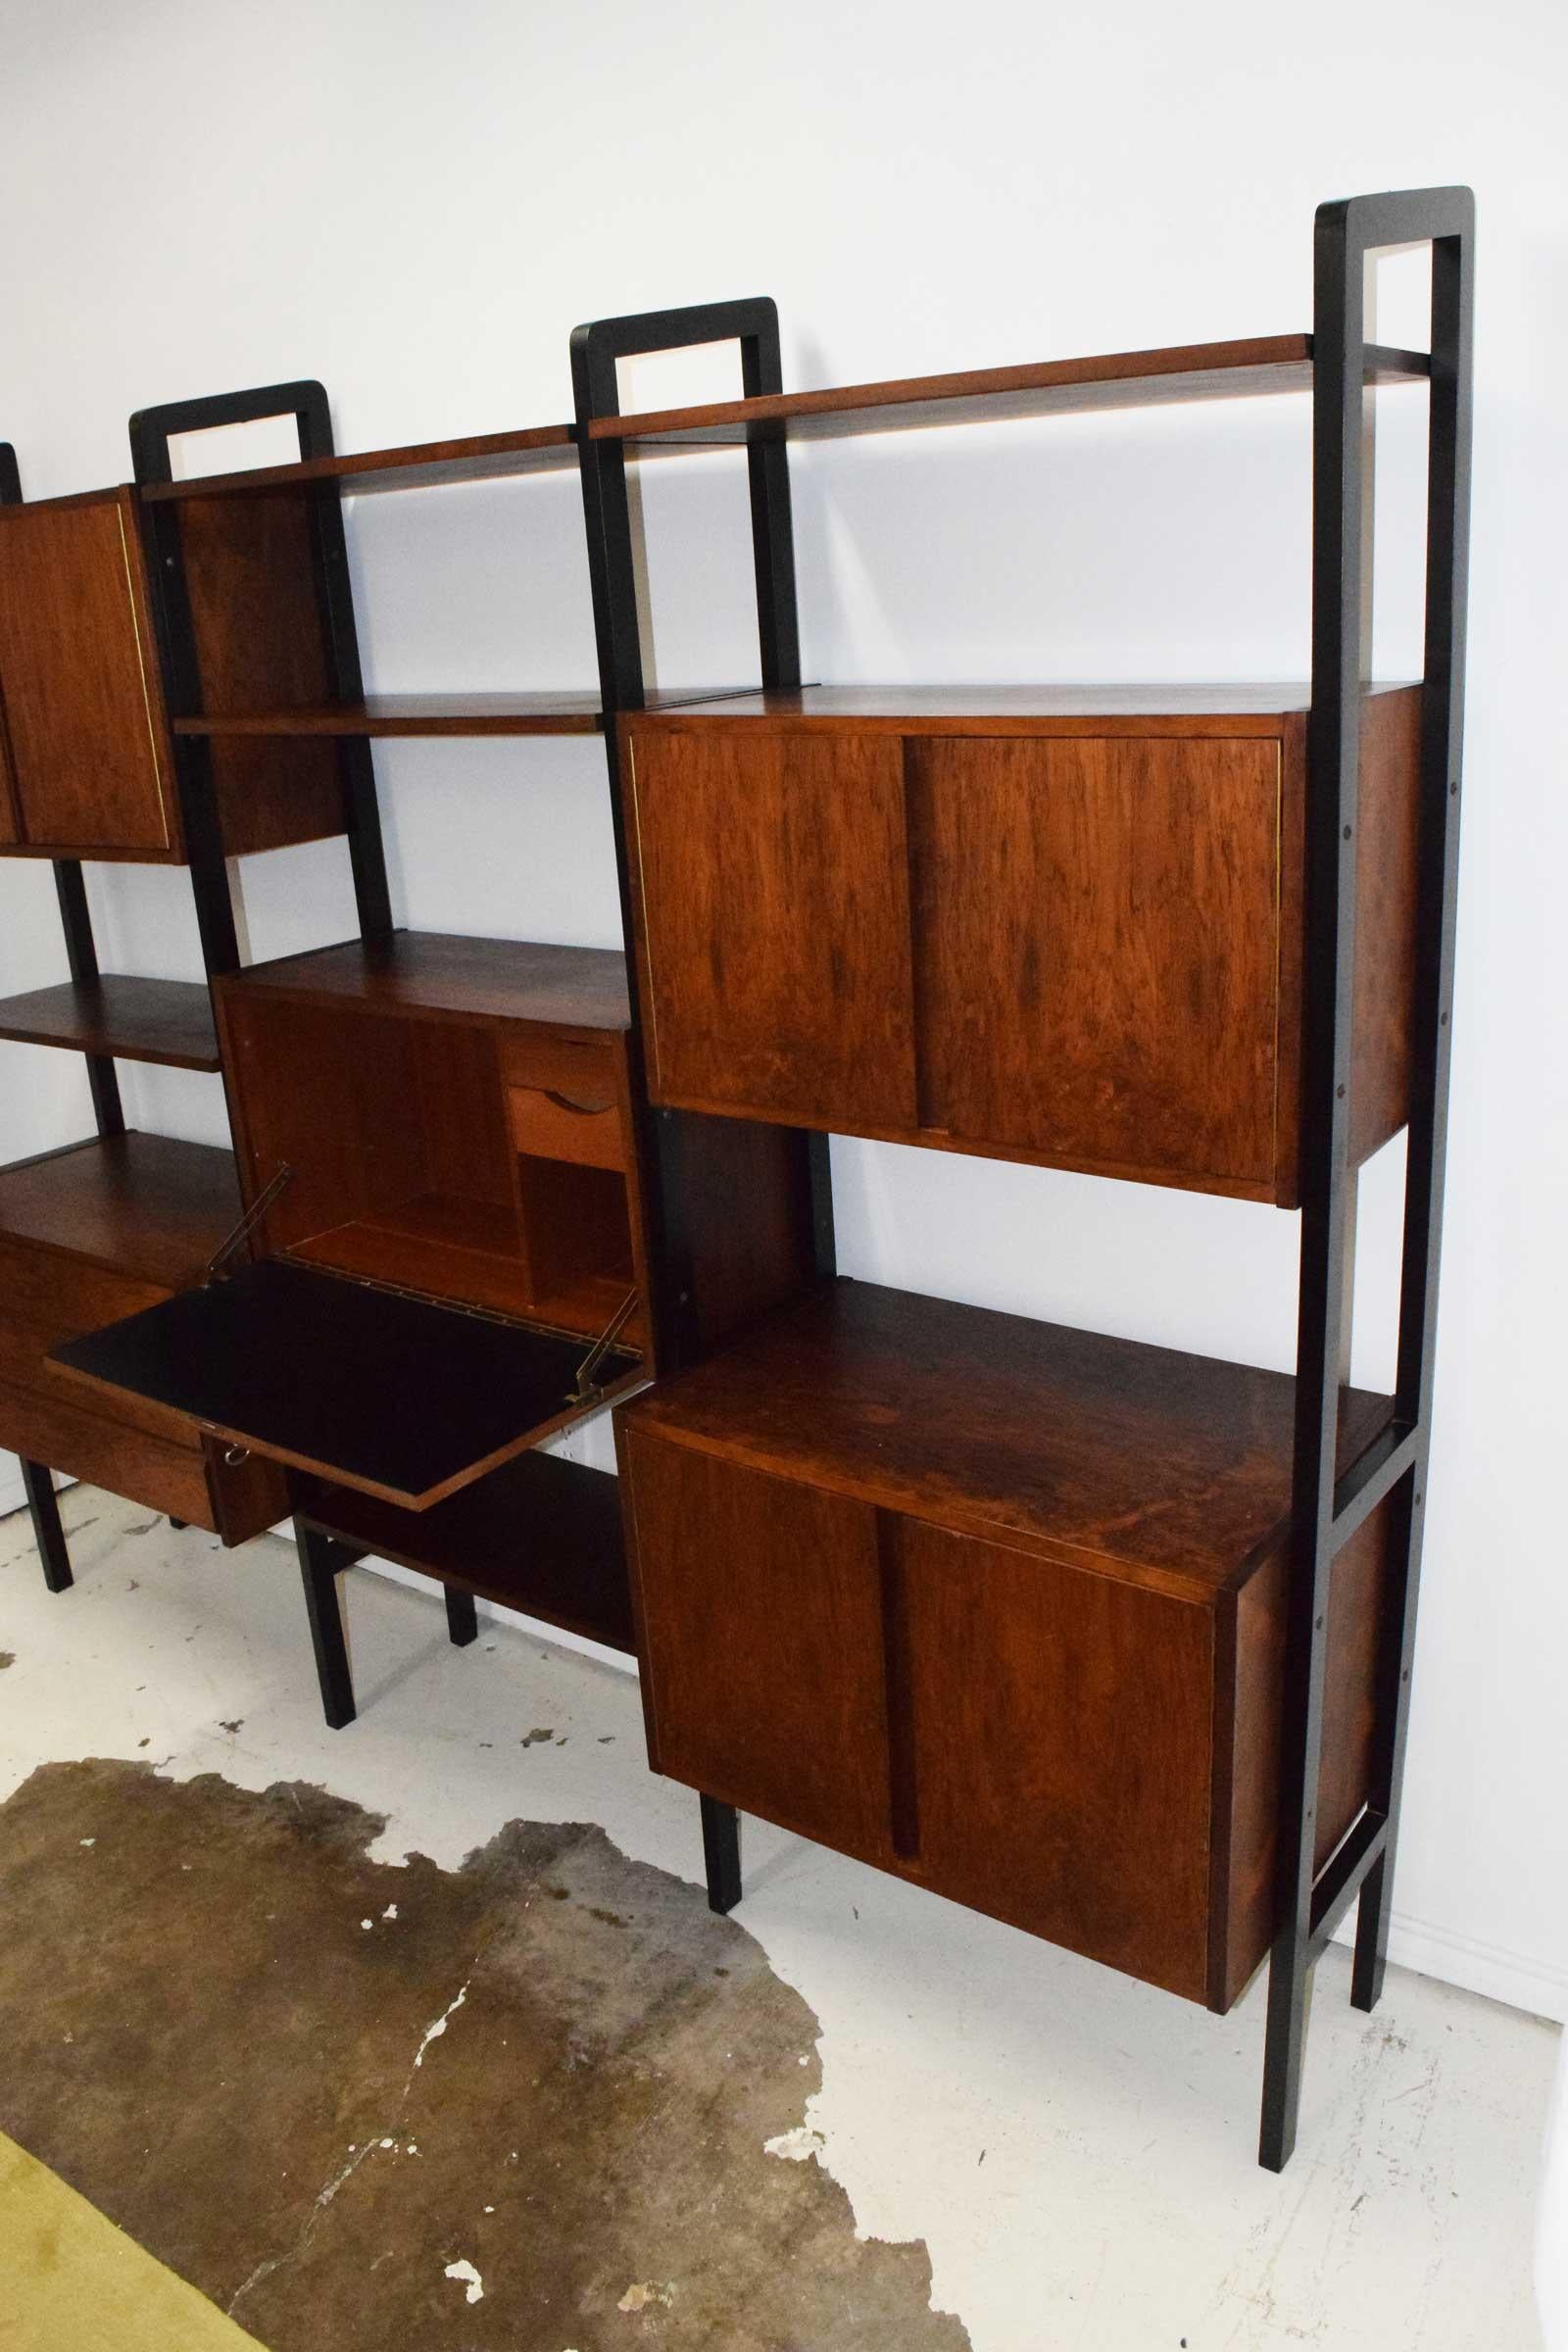 3 bay bookcase and storage unit in rosewood. Has cabinets and drawers as well as a drop door with key.